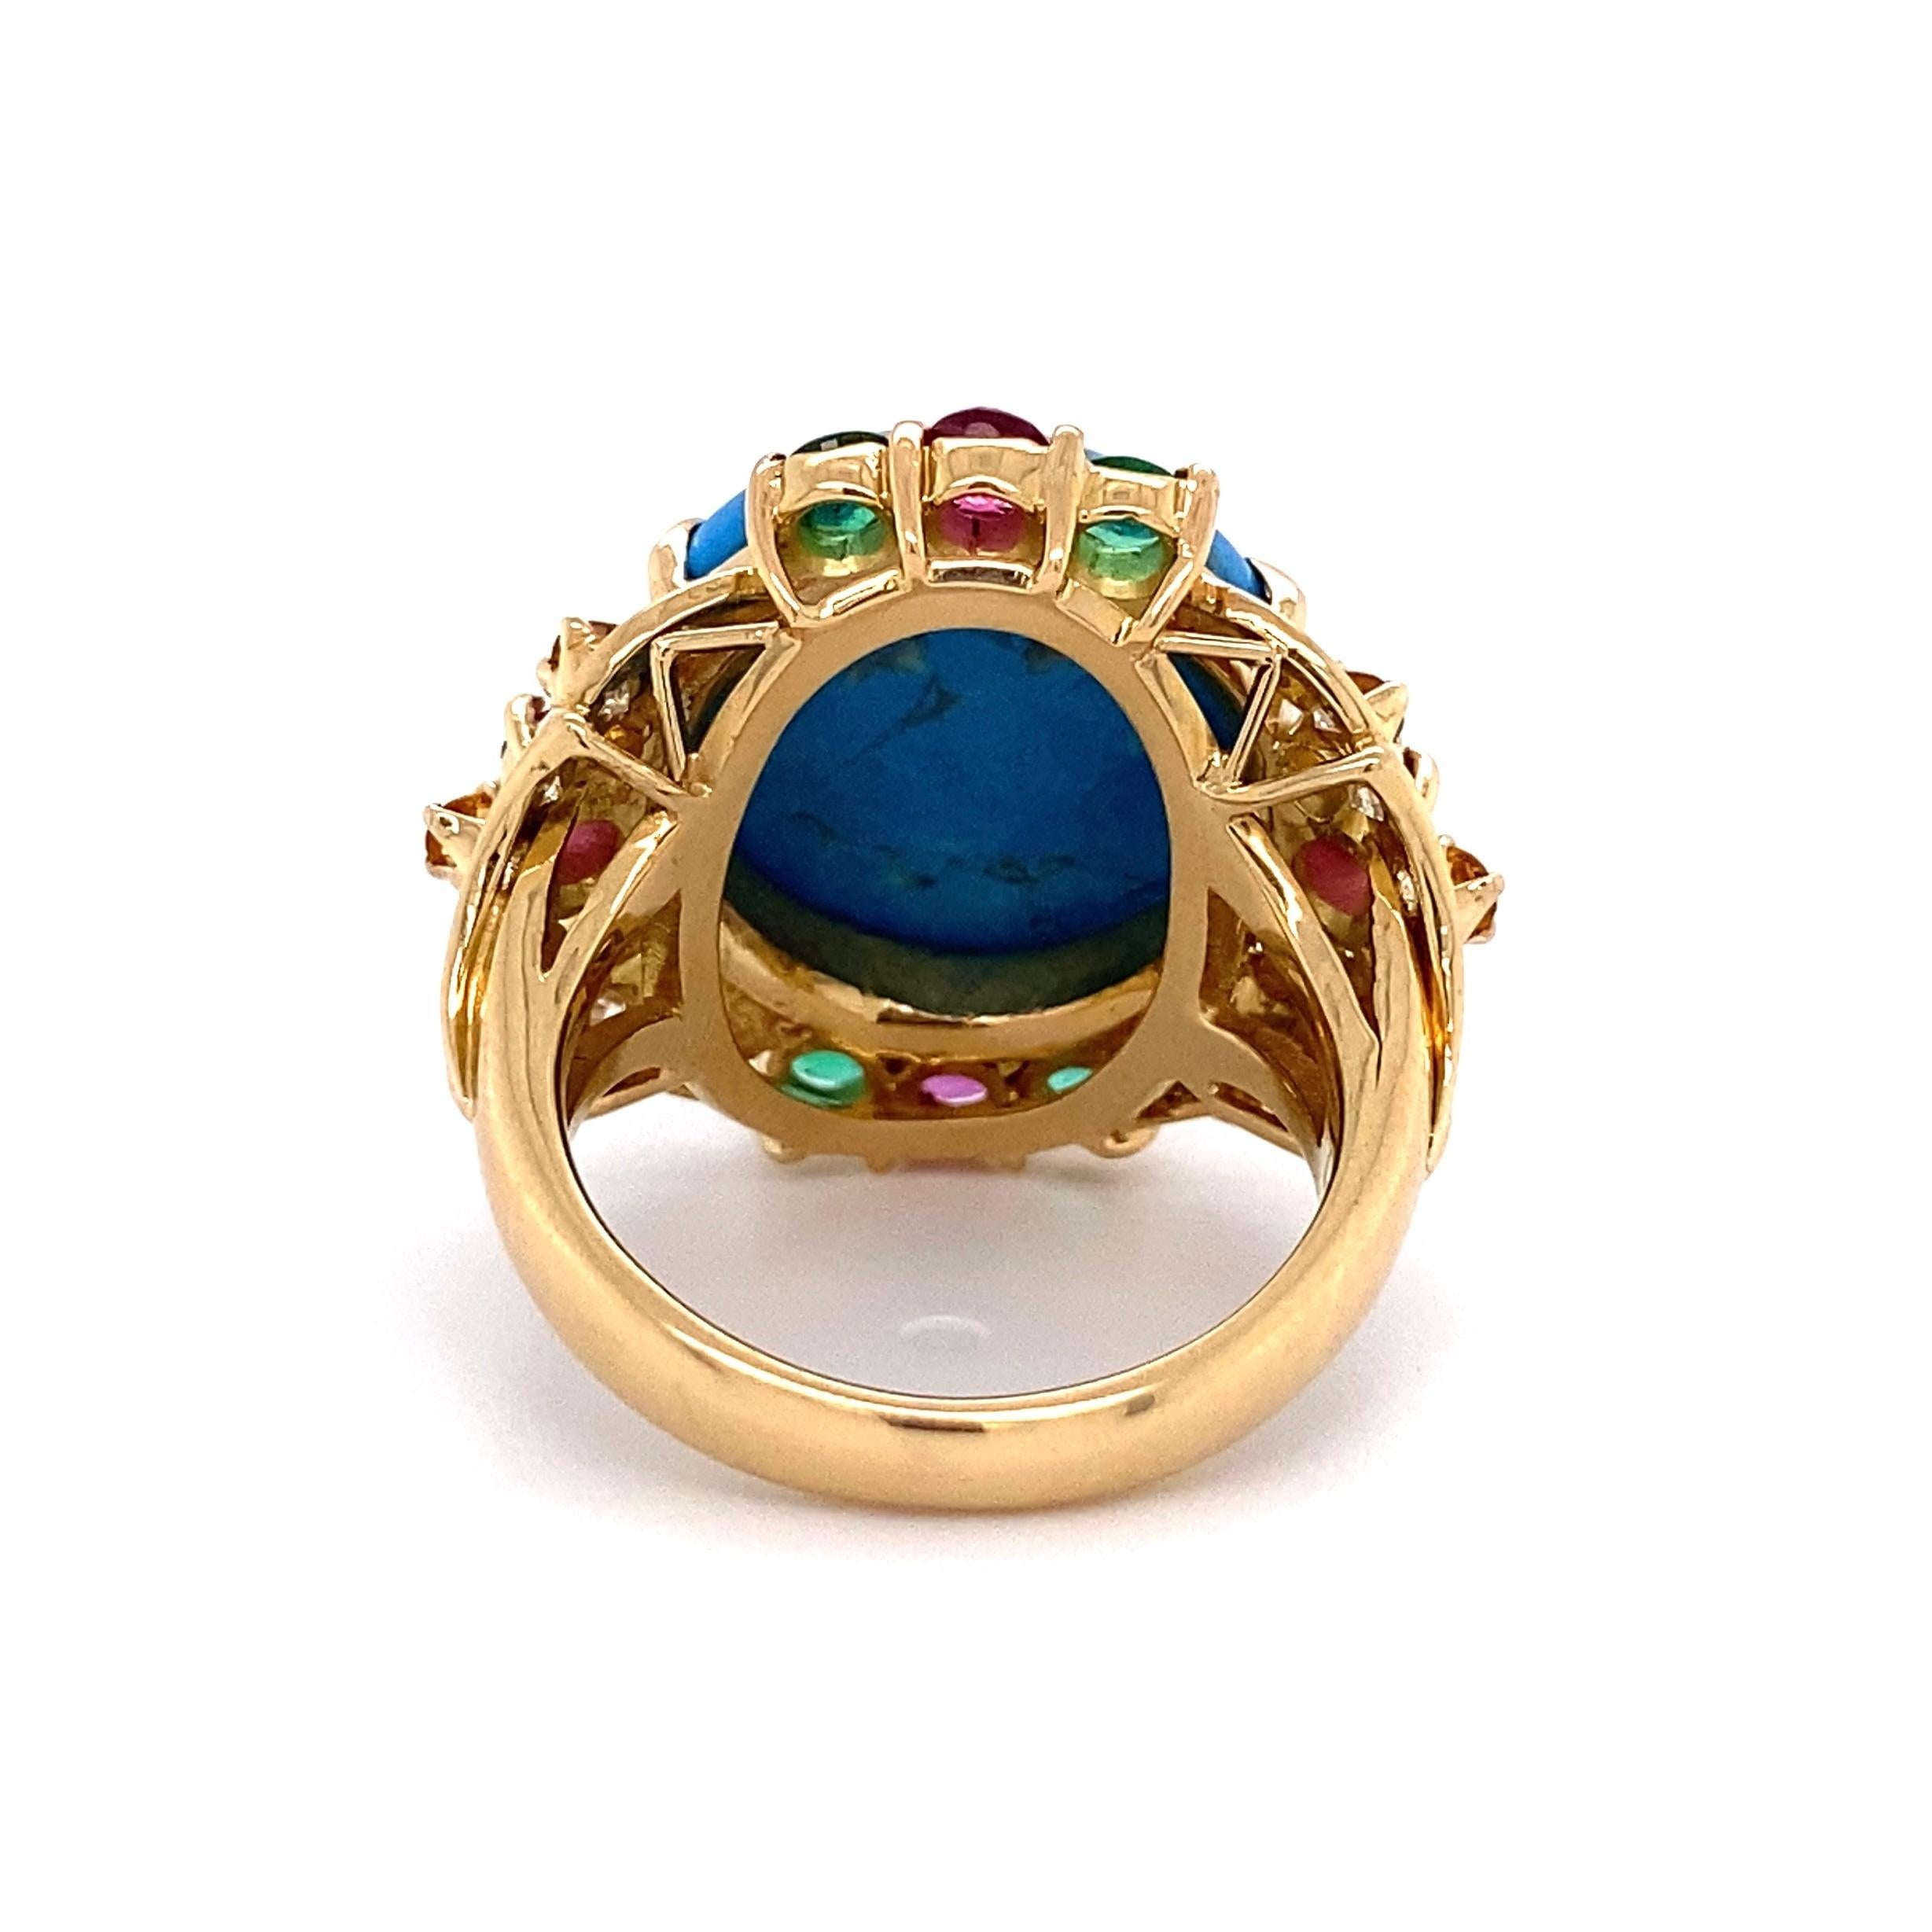 Modern 5.5 Carat Turquoise Diamond Emerald Ruby Gold Cocktail Ring Estate Fine Jewelry For Sale